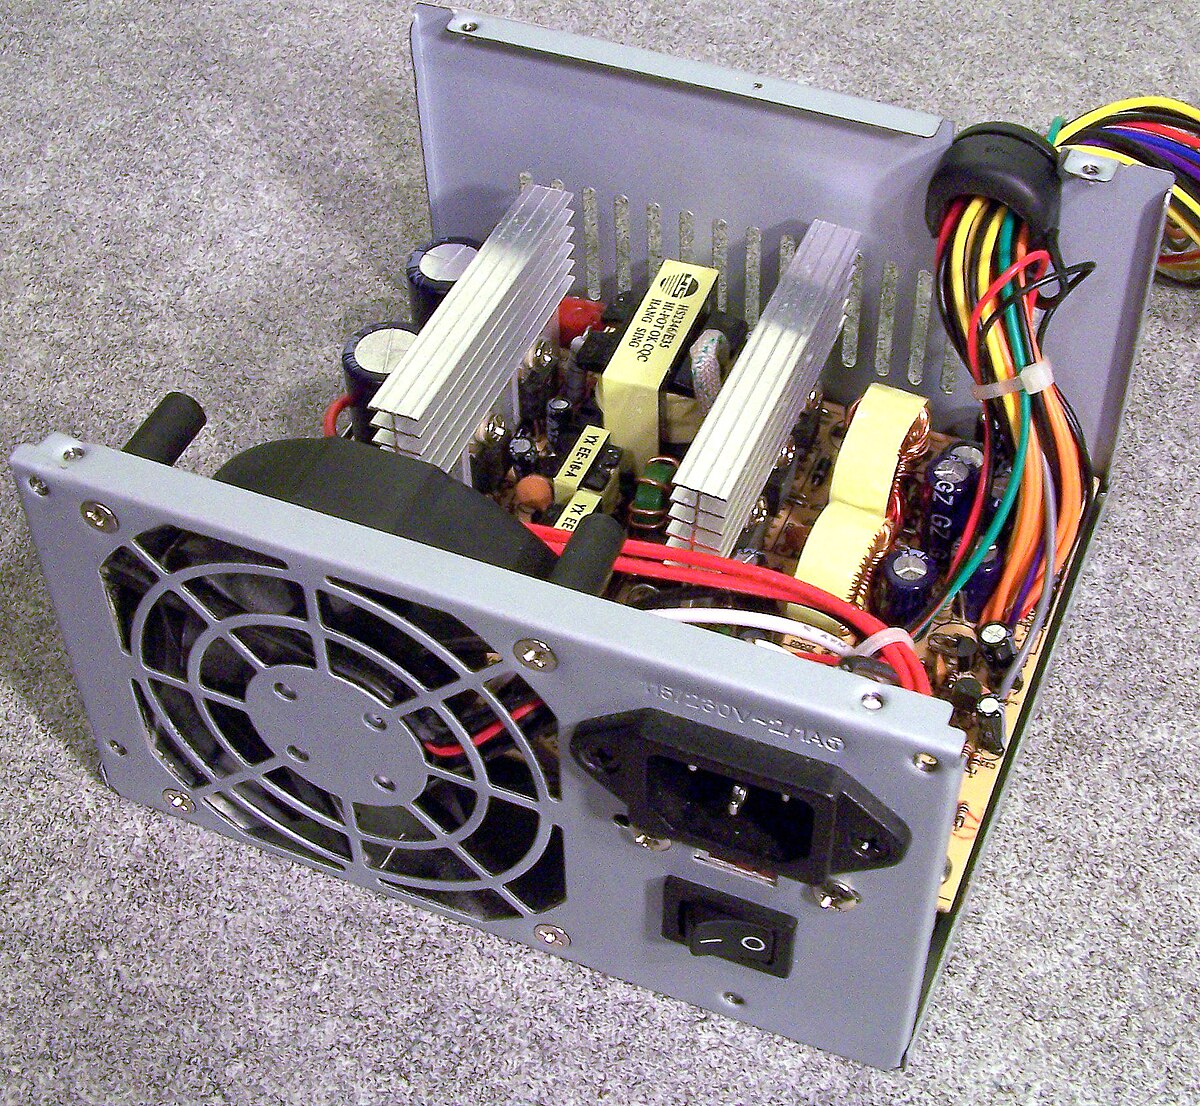 Motherboard and power supply components